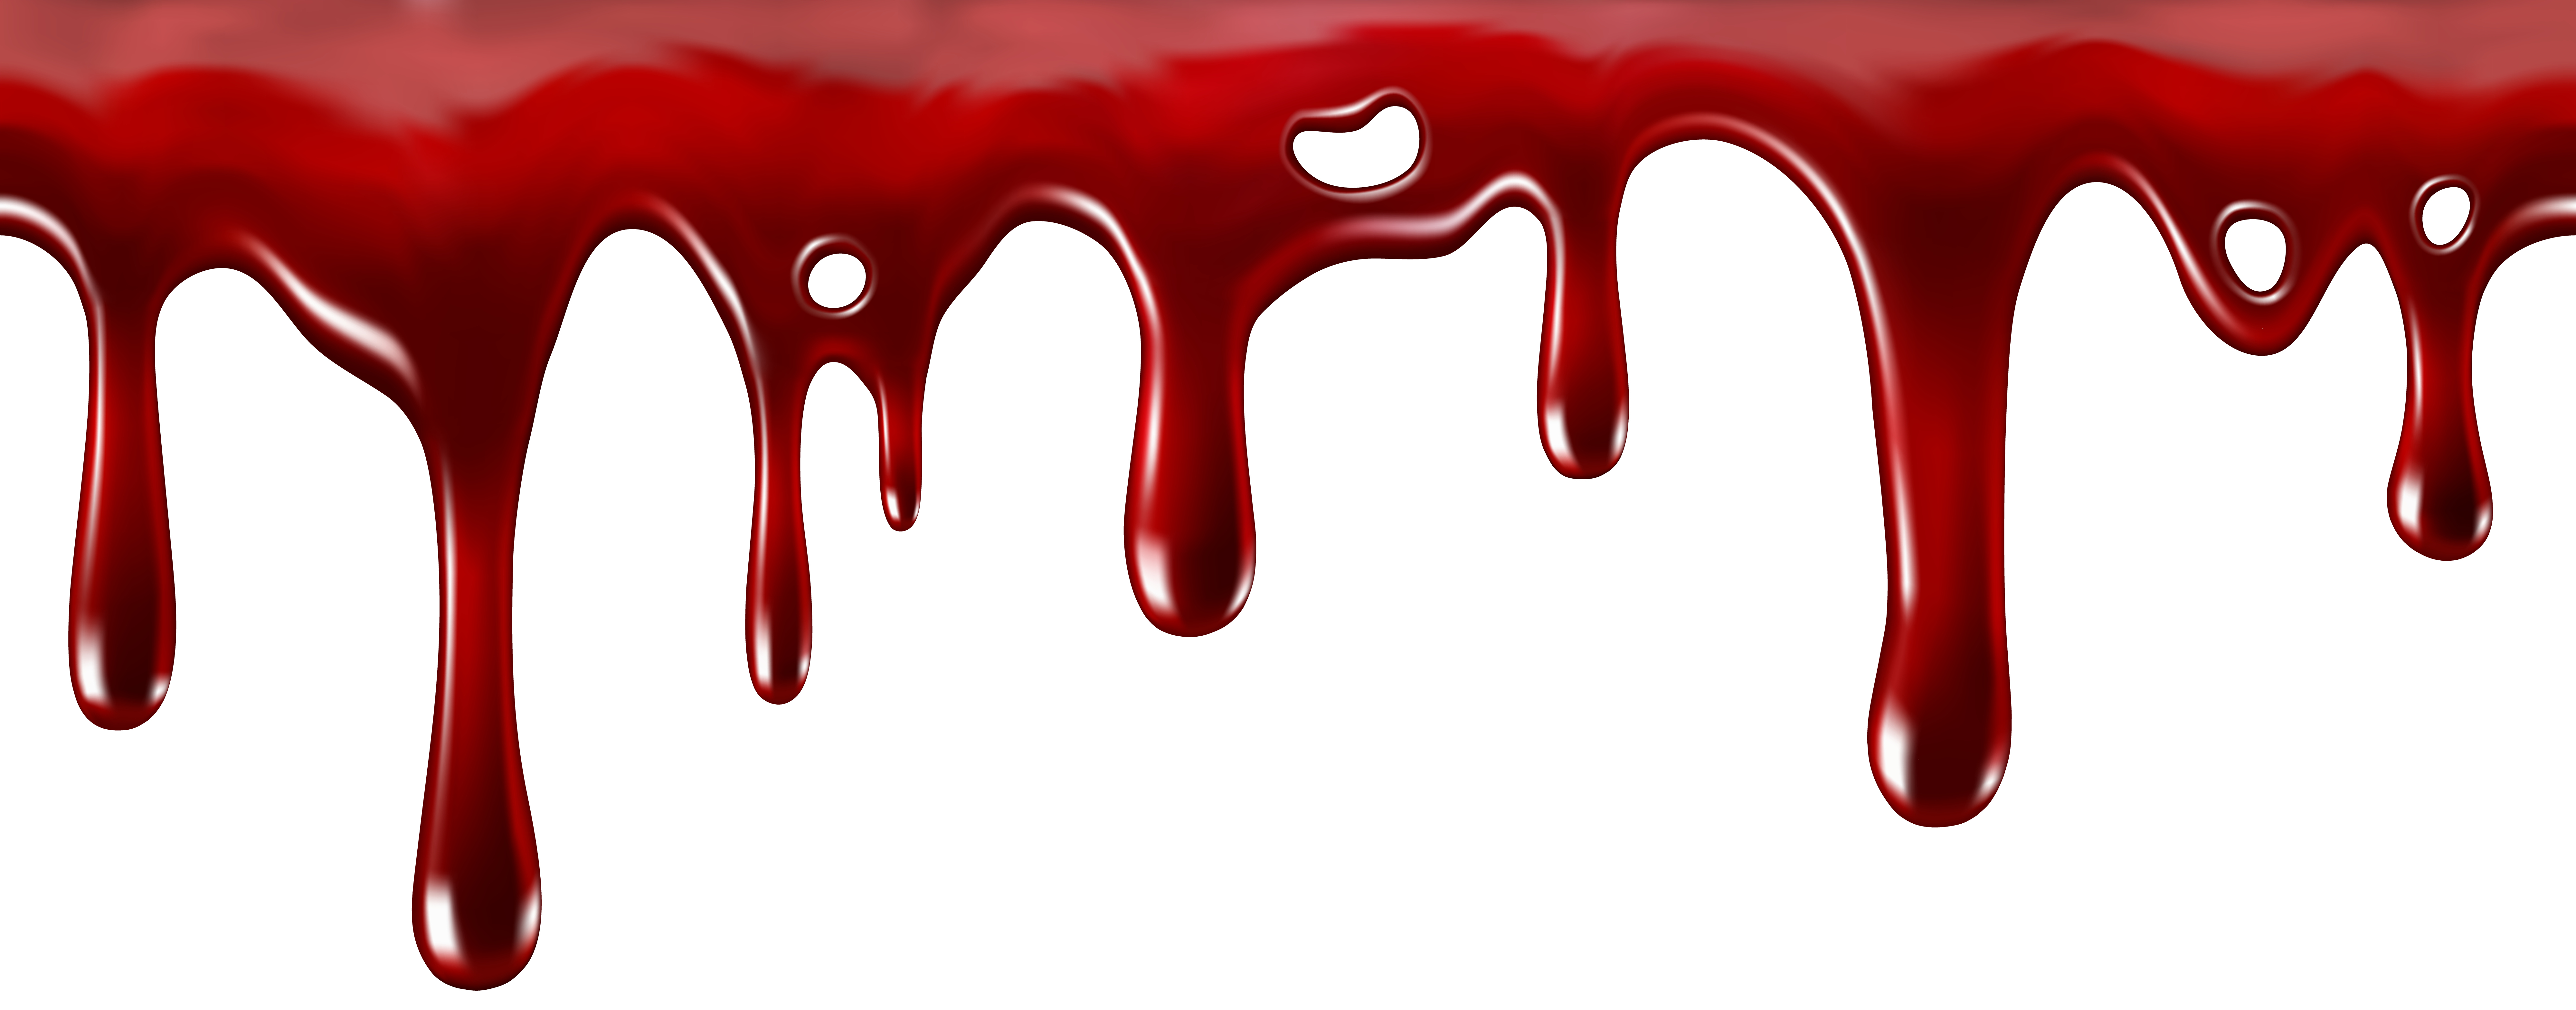 Dripping decor transparent png. Jesus clipart blood